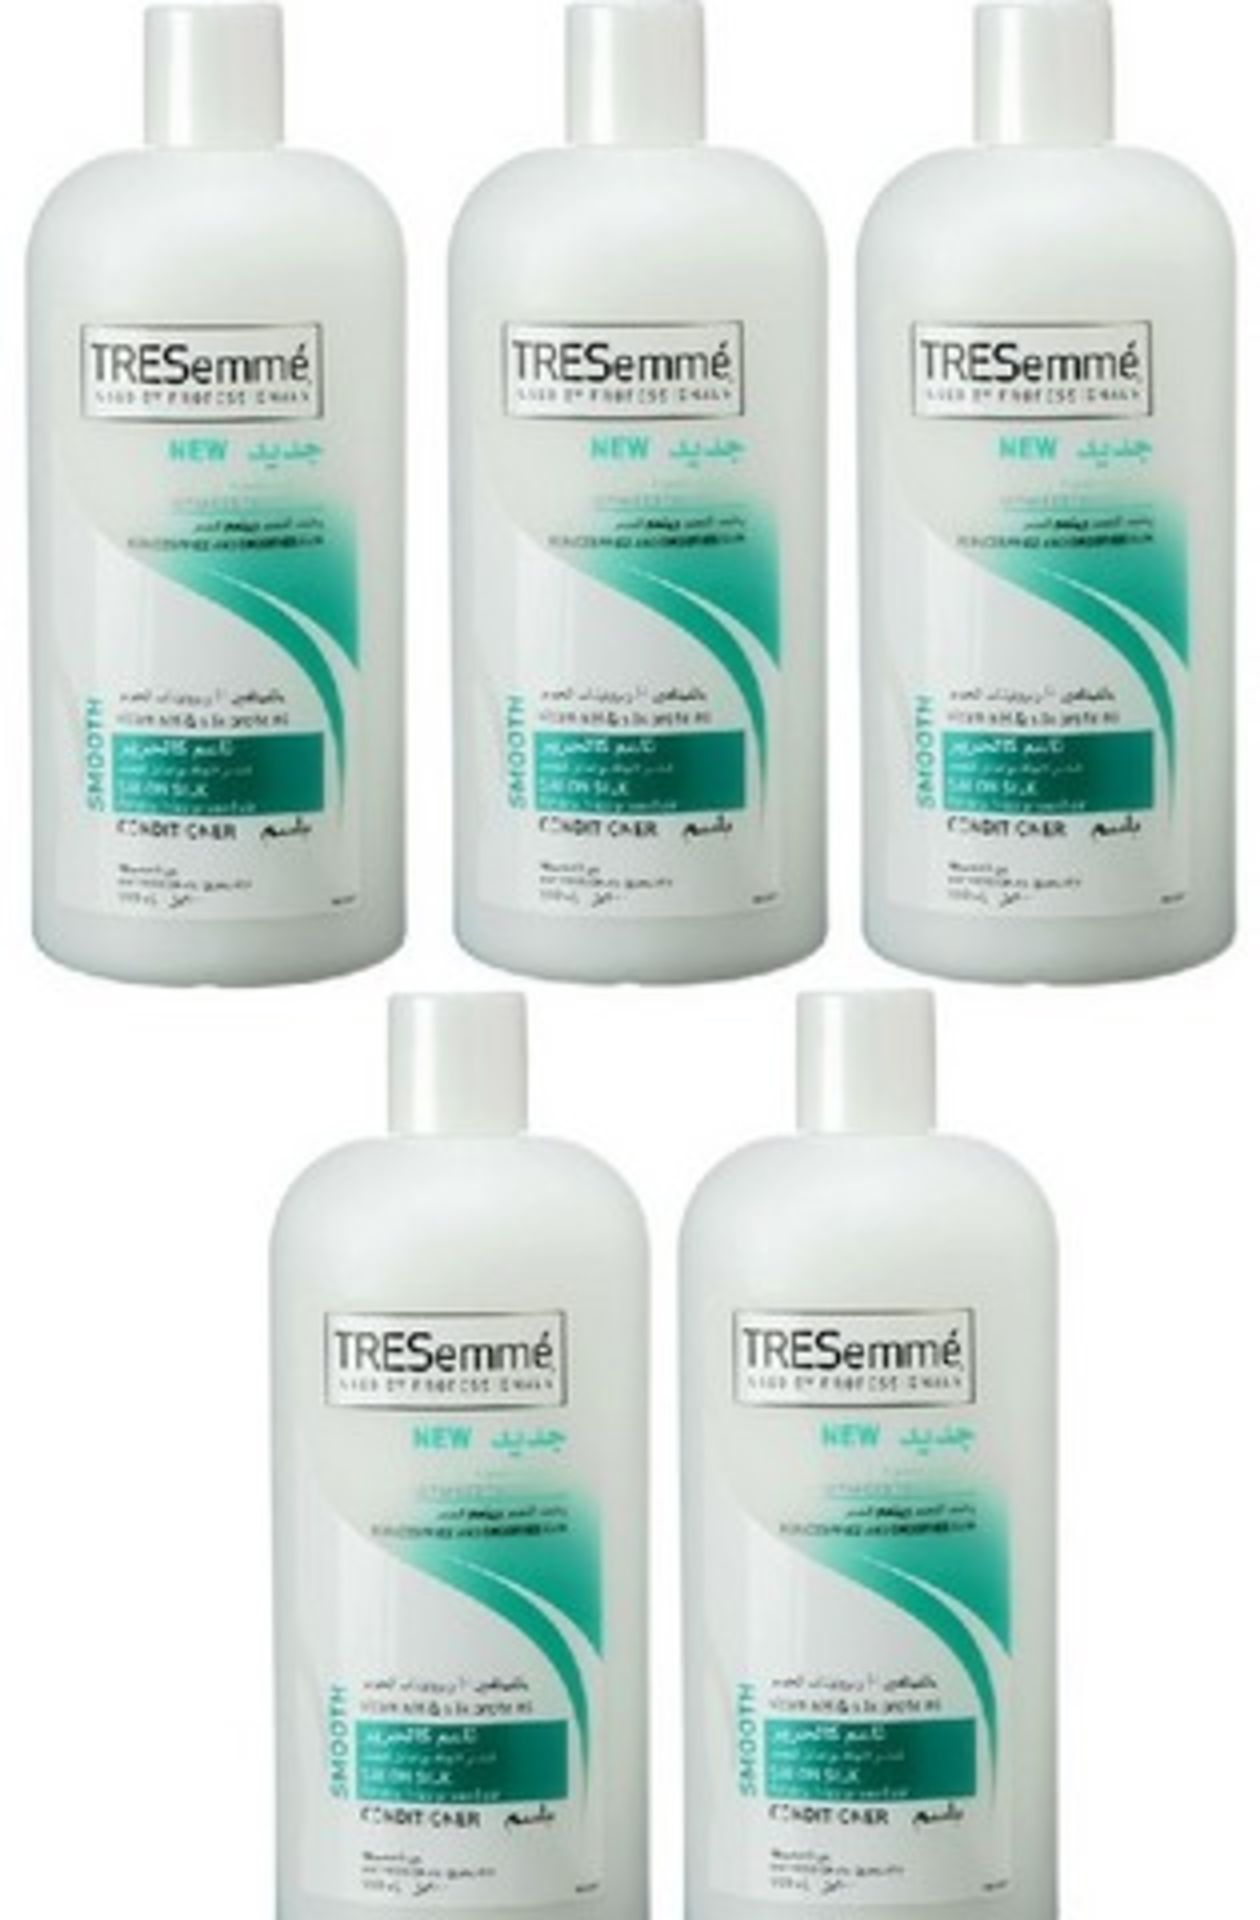 V Brand New Lot Of 5 Bottles (900ml) TRESemme Professional Salon Silk Conditioner For Dry, Frizz